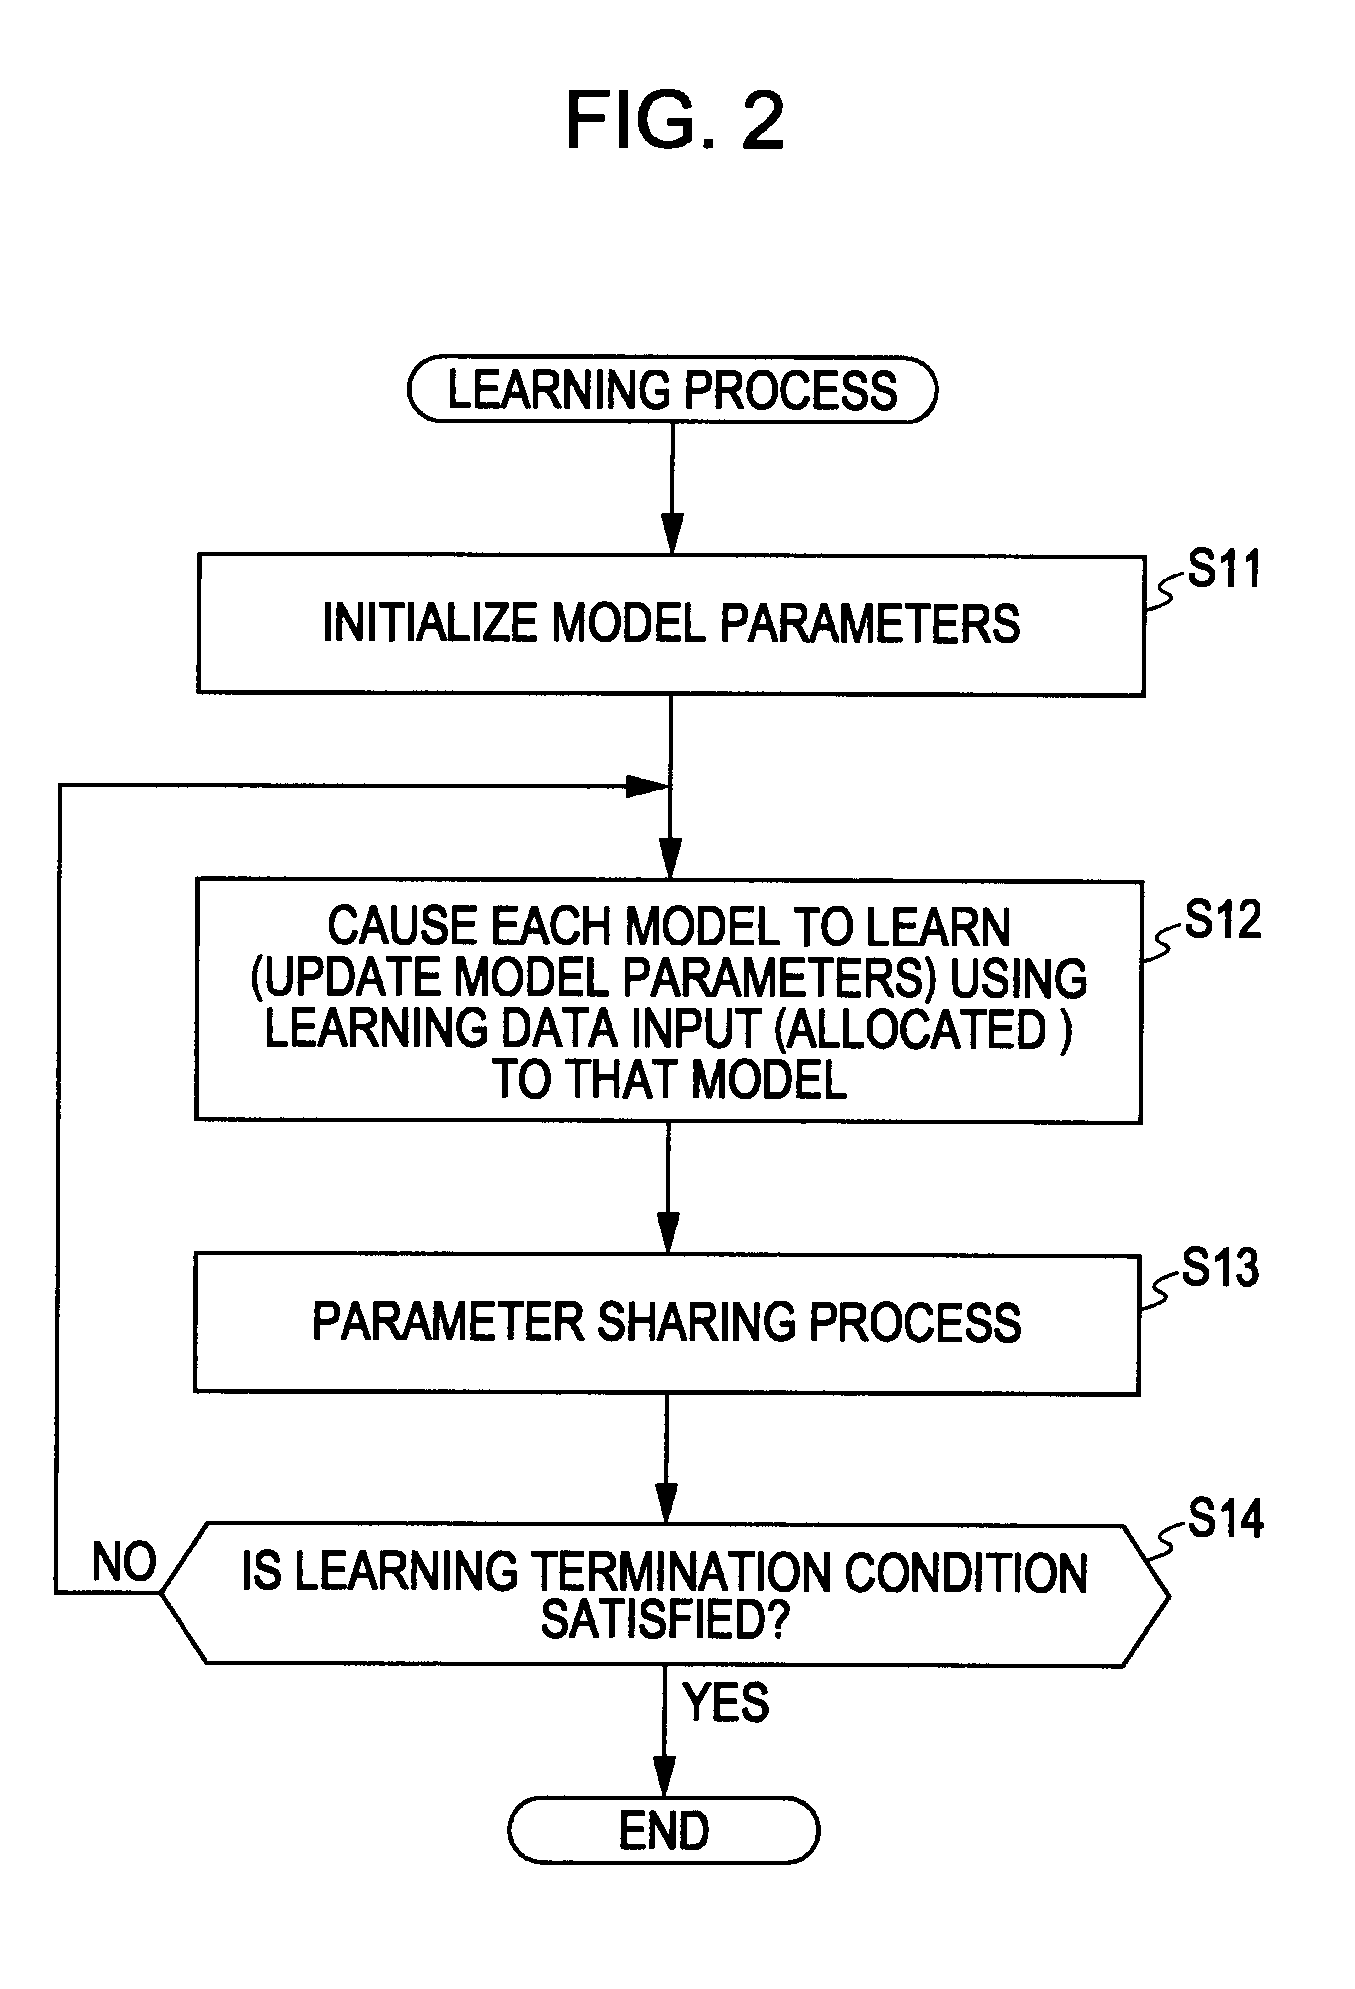 Learning Device, Learning Method, and Program